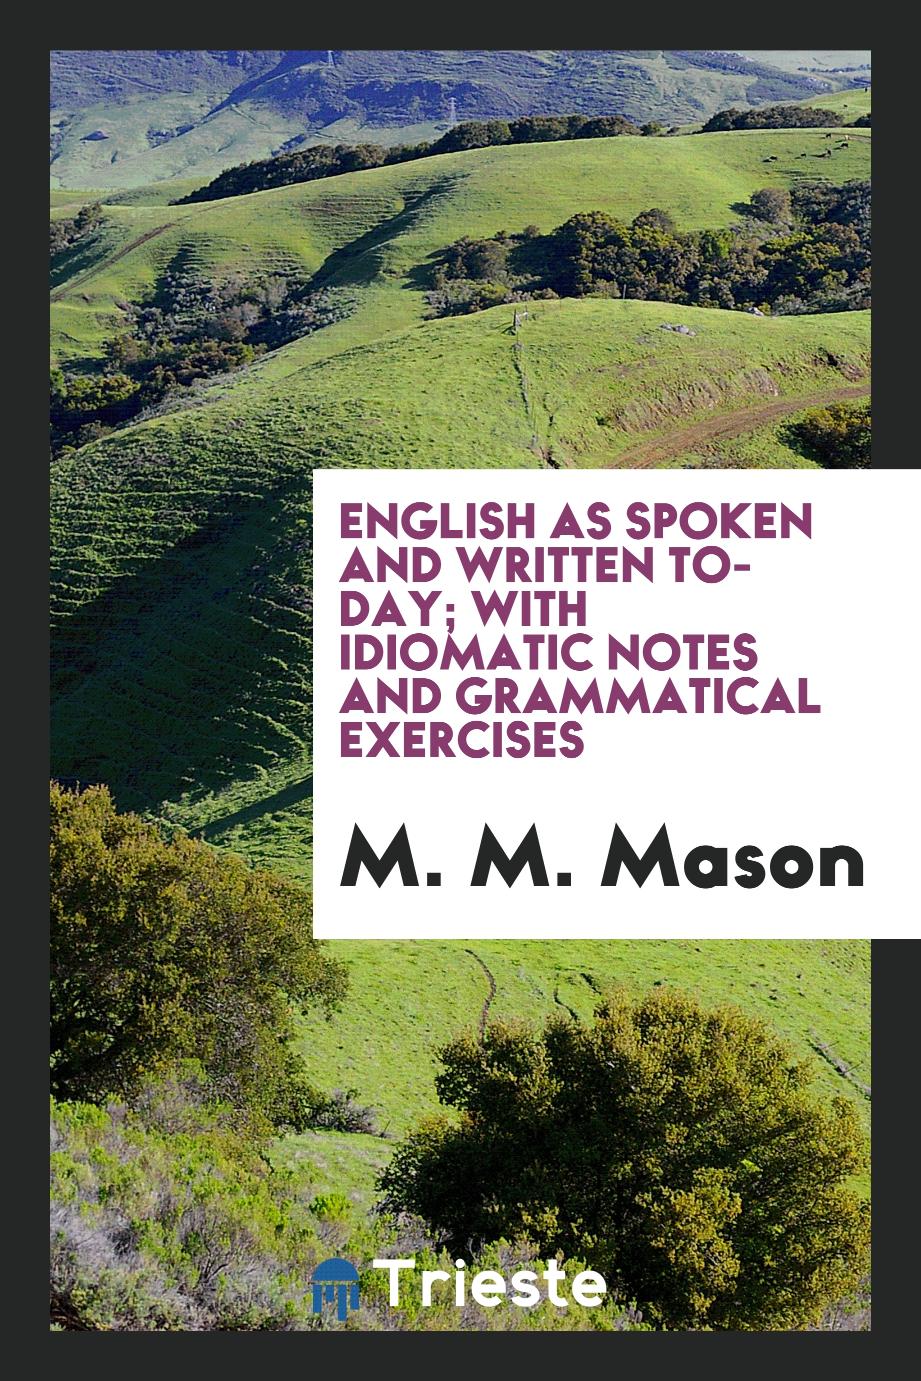 English as spoken and written to-day; with idiomatic notes and grammatical exercises